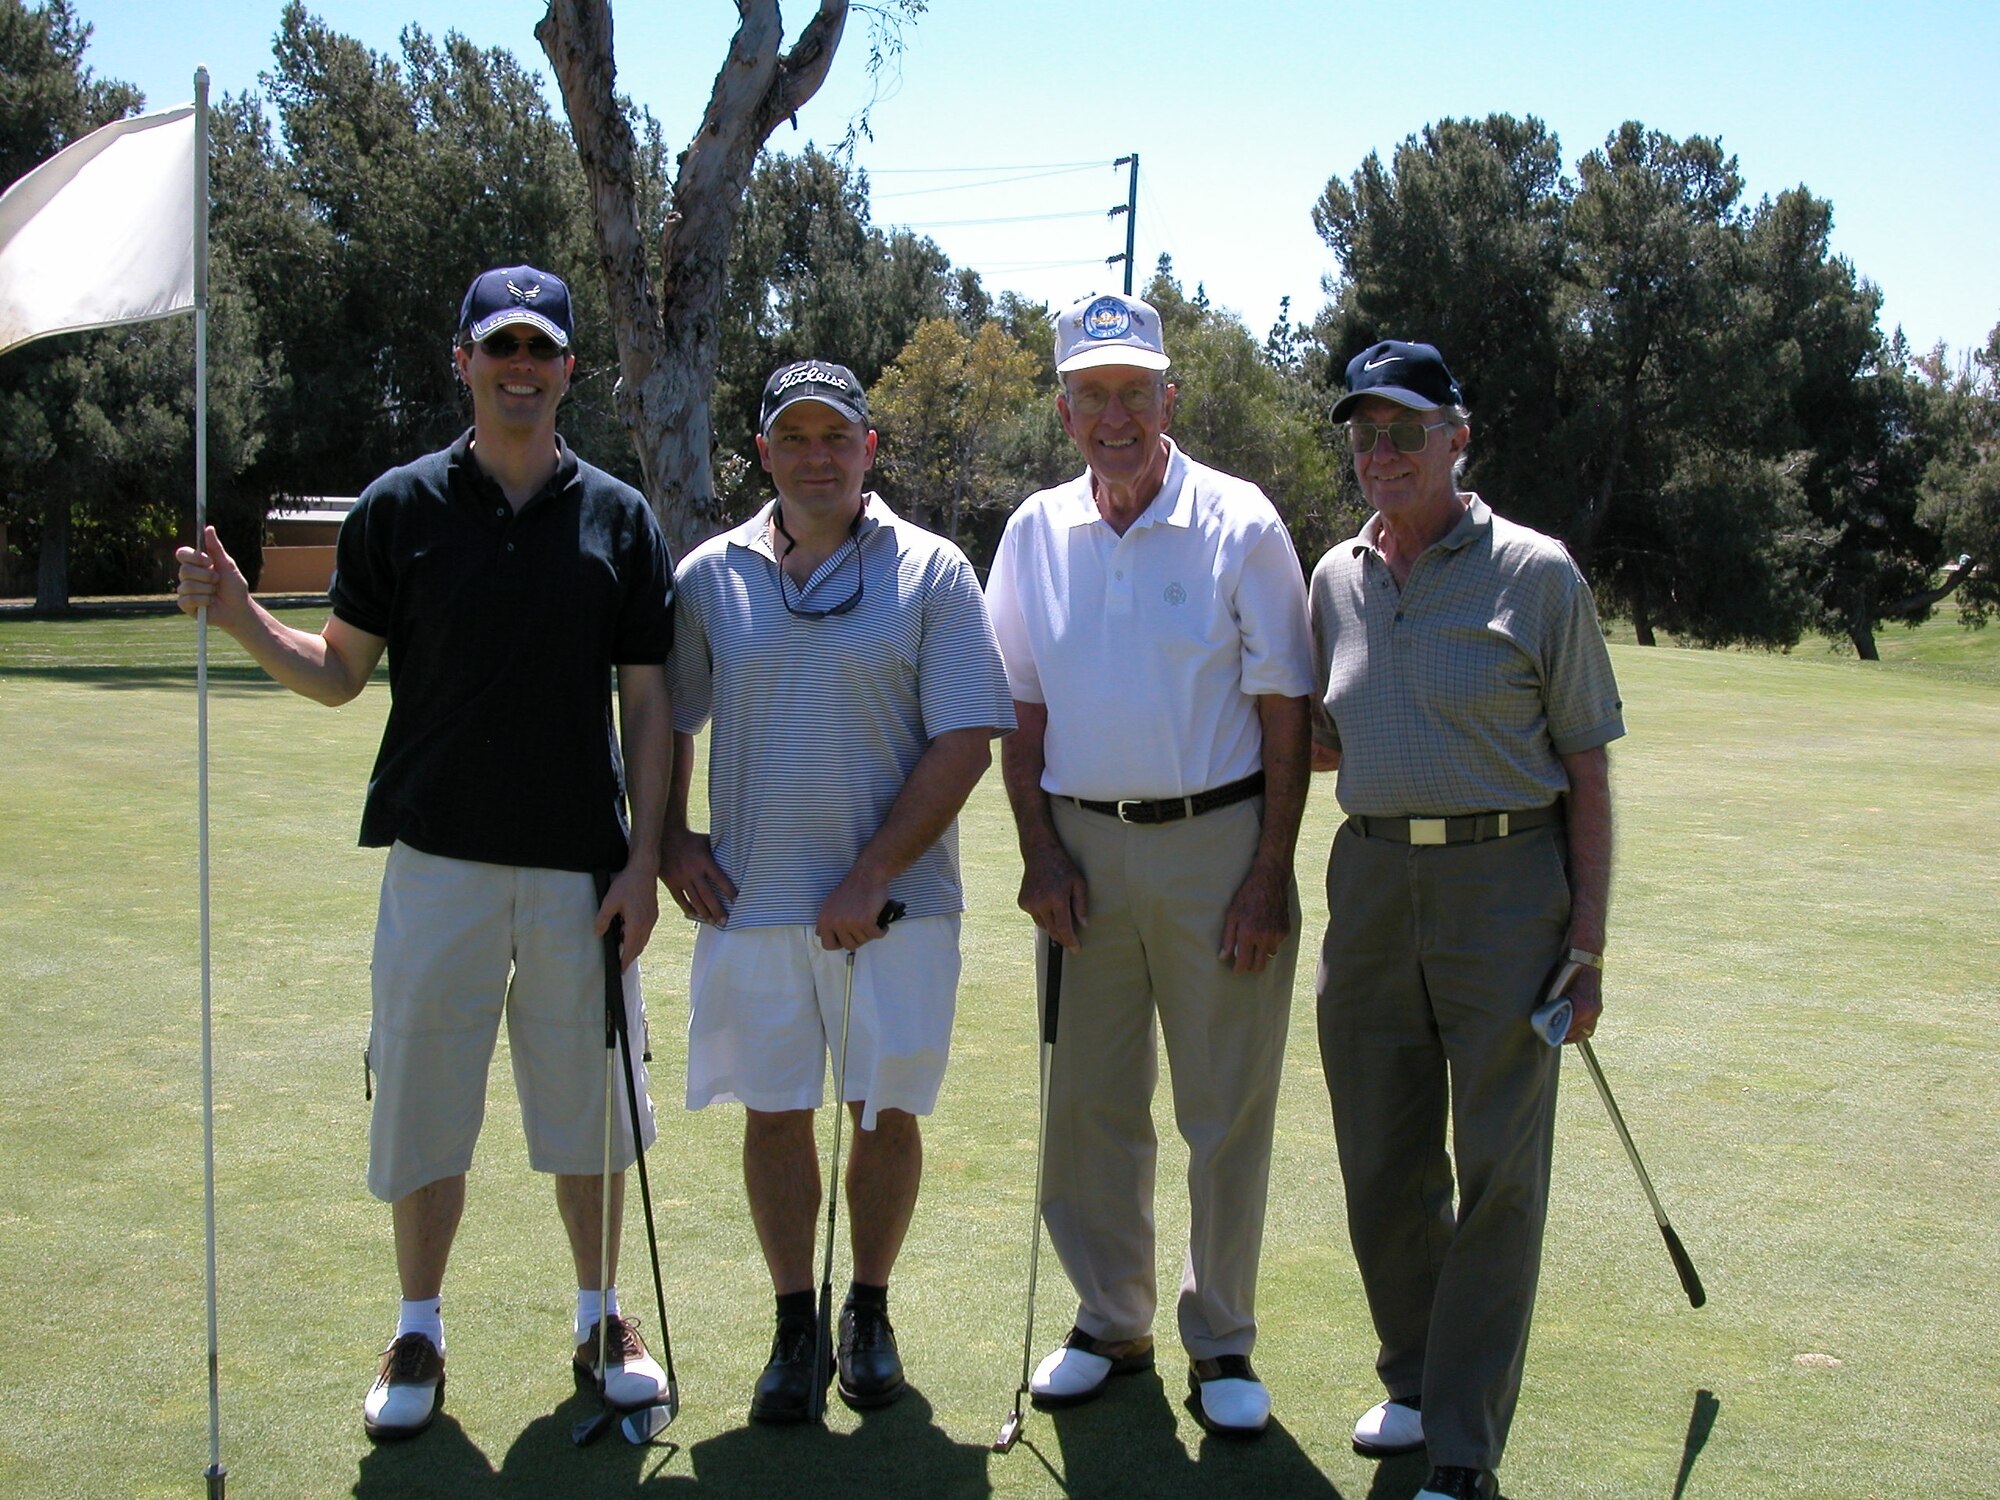 Team March golfers were hampered by a head wind at the annual Broken Shaft golf tournament where the civilians of the community won the team trophy by only 50 strokes. The annual golf game, organized by the Greater Riverside Chambers of Commerce for more than 30 years, saw about 40 players take the course. This year’s tournament again was played at Jurupa Golf Course. Awards were presented after the game for closest to the pin, low net score, low gross score and best ball net. The players enjoyed dinner in the club house as well as a good amount of teasing when the broken shaft trophy was presented.
Top Teams for Best Balls Net
1st Place: Mike Bowery, Hap Heublein, Tim Plein, Elaine Plein
2nd Place: Don Brower, Hal Austin, Jeff Barnson, Steve Barnett
Closest to the Pin# 3: Dana Hessheim
Closest to the Pin# 18: Chuck Manley
1st Low Gross: Phil Rizzo (25)
2nd Low Gross: Mike Lanahan (80)
1st Low Net: Cam LeBlanc (63)
2nd Low Net: Bill Kimble (66)
Winners of the Trophy: Team MAC 1349
Winners of the Broken Shaft: Team March 1399
(U.S. Air Force photo by Maj. Don Traud)